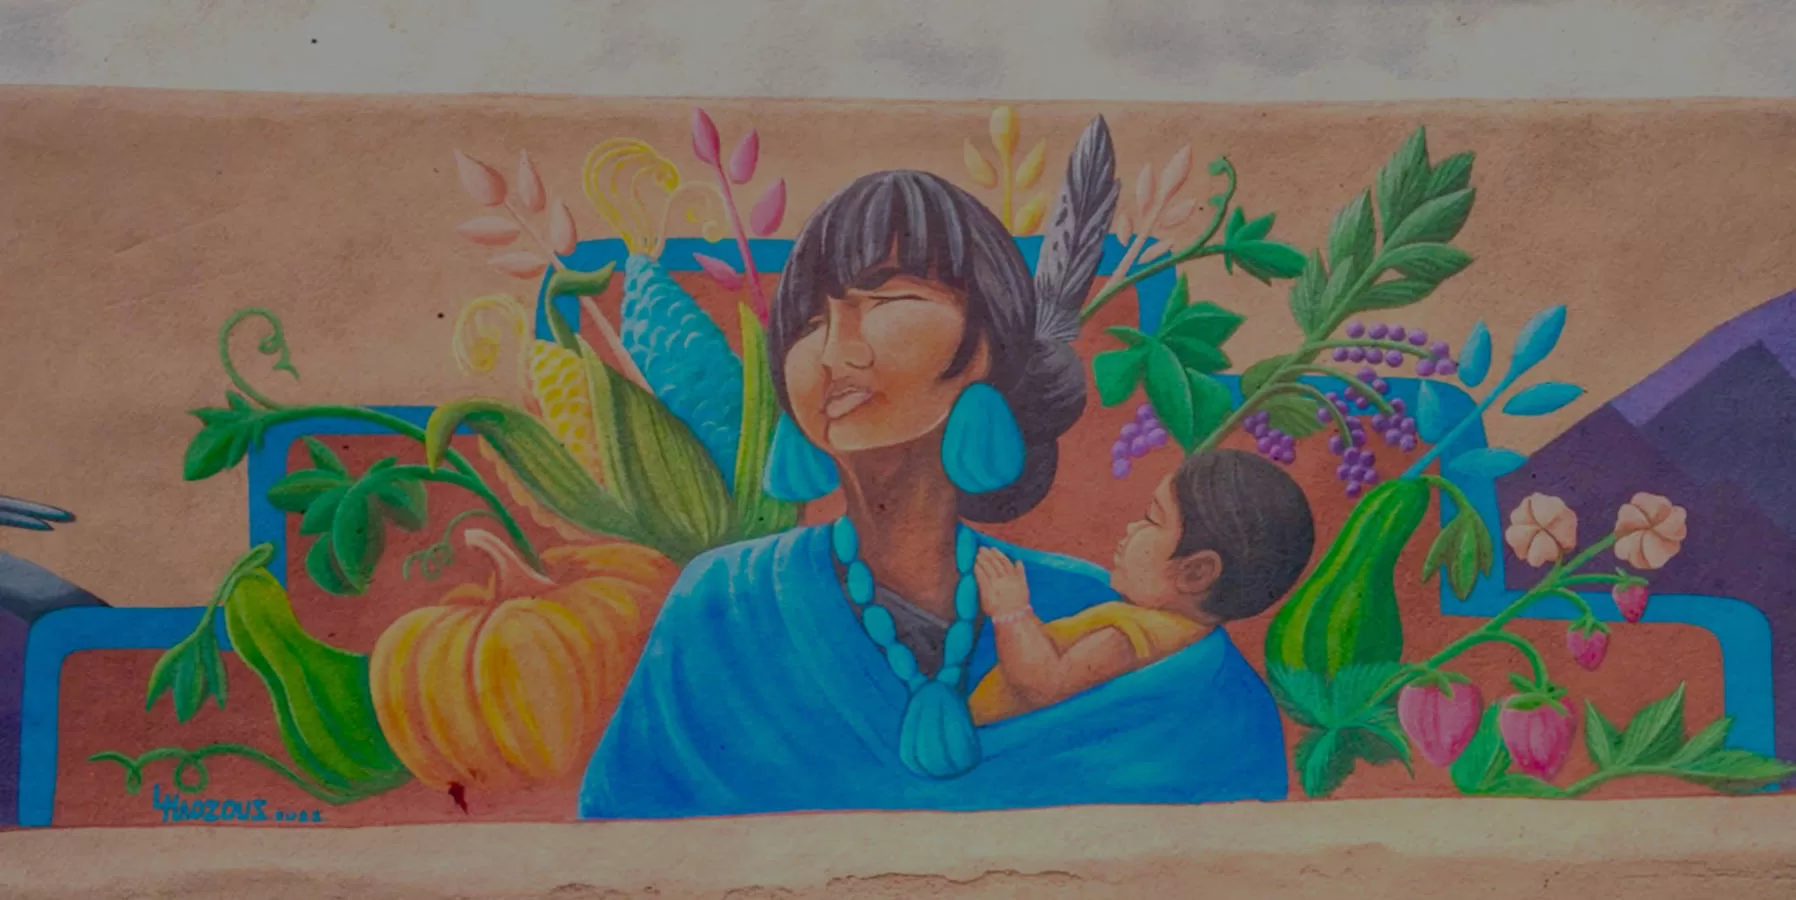 Mural of indigenous woman and child in Taos, NM